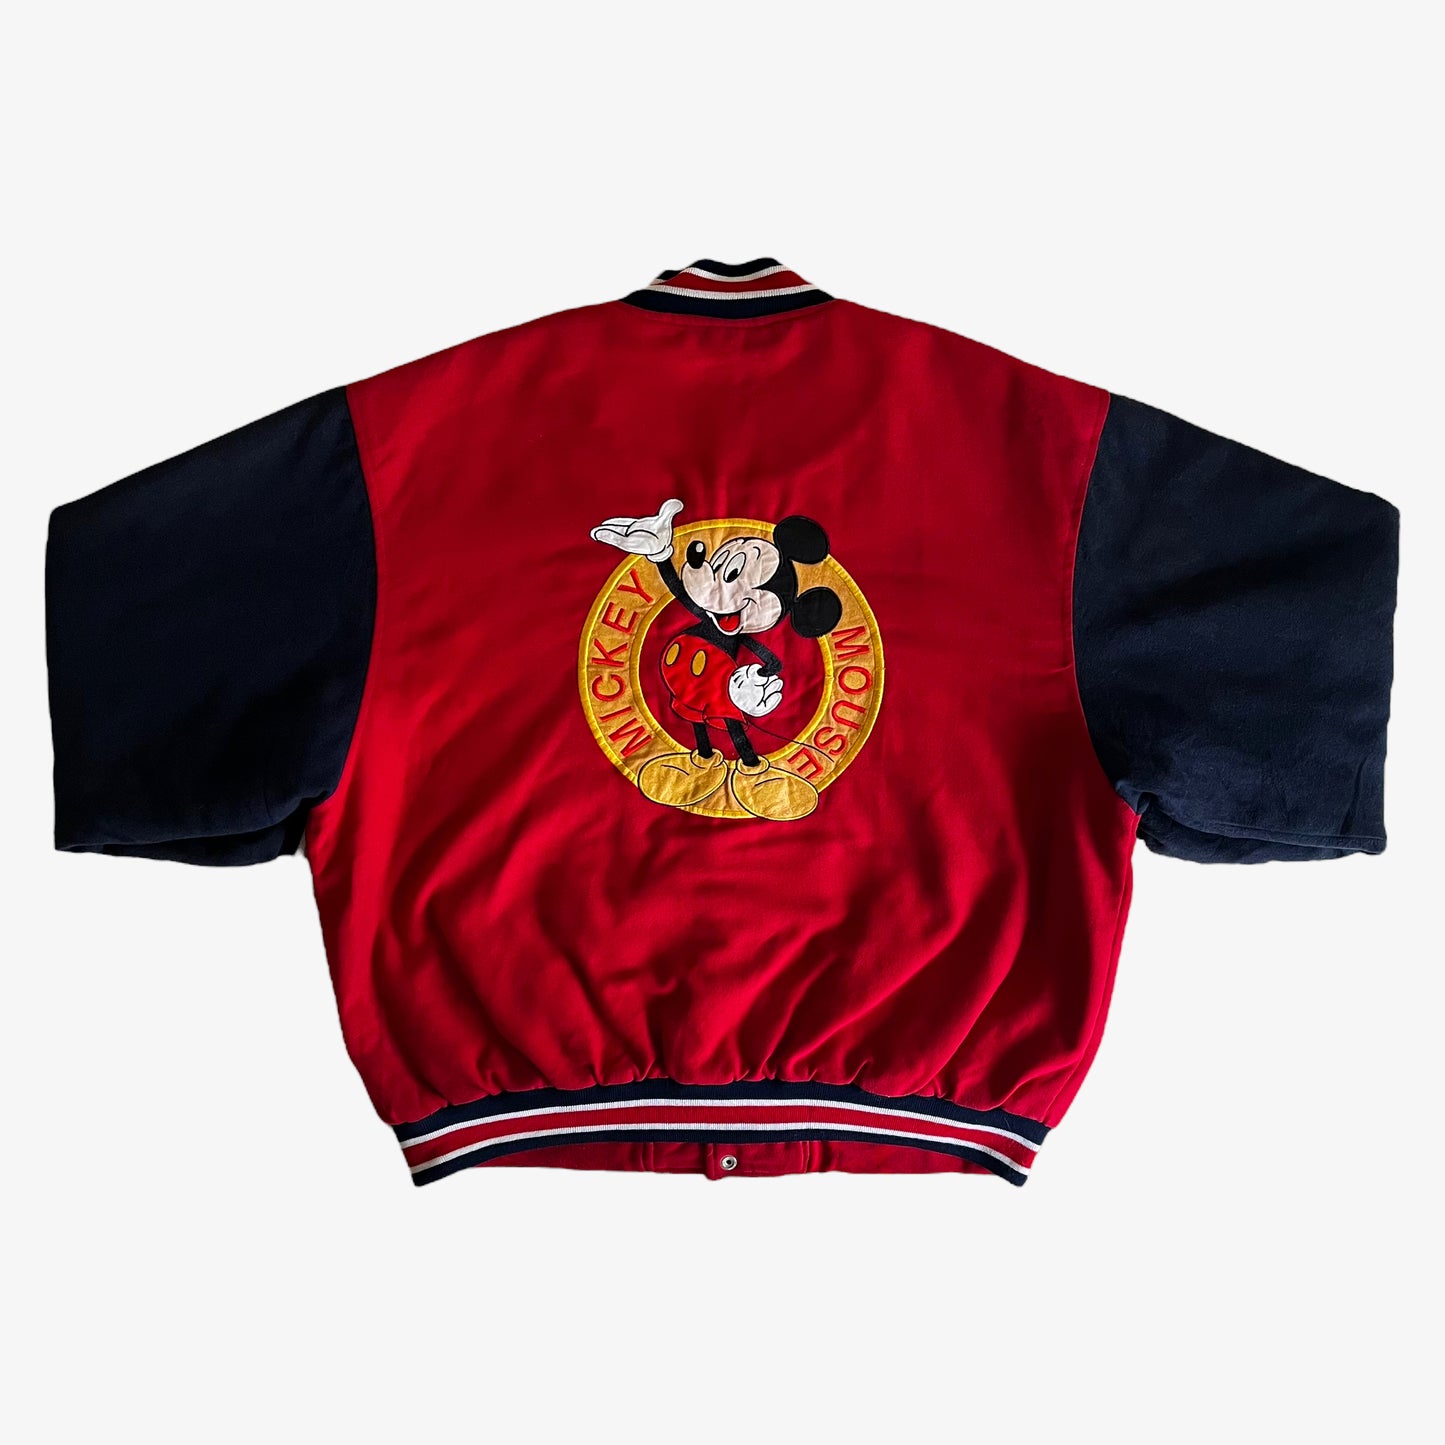 Vintage 90s Disney Mickeys Stuff Varsity Jacket With Back Embroidered Spell Out Back - Casspios Dream